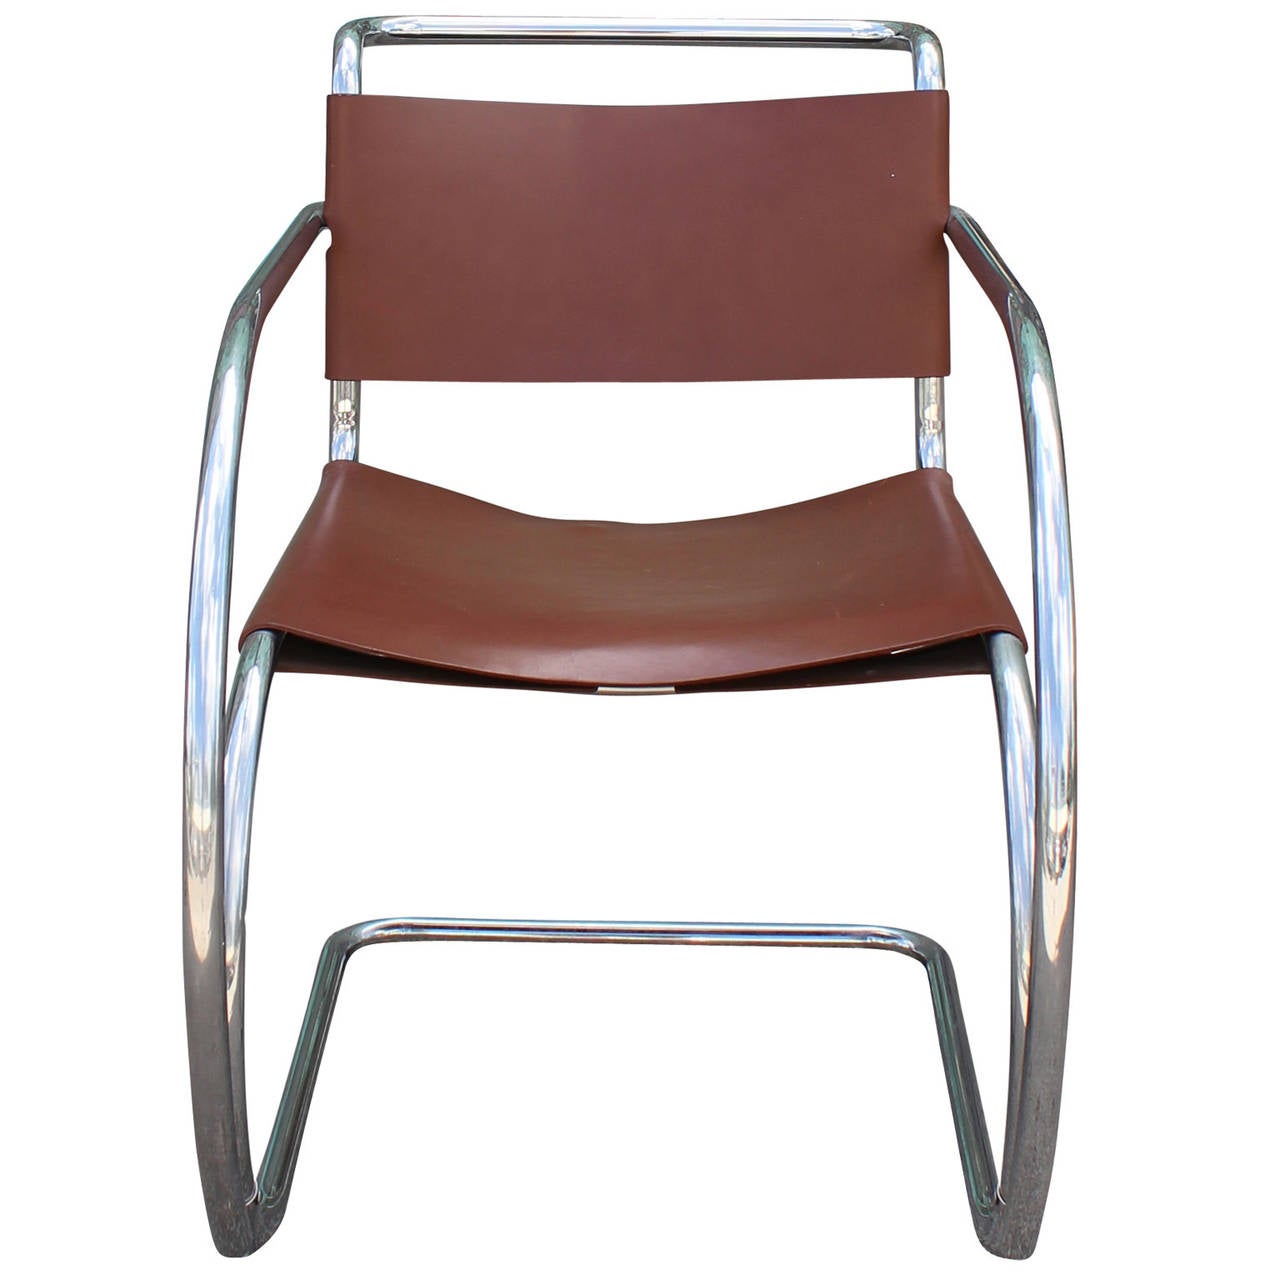 Beautiful MR 20 chair designed by Ludwig Mies van der Rohe in 1927. This production is from the 1970s and is in excellent vintage condition. Caramel colored leather is beautiful and clean.